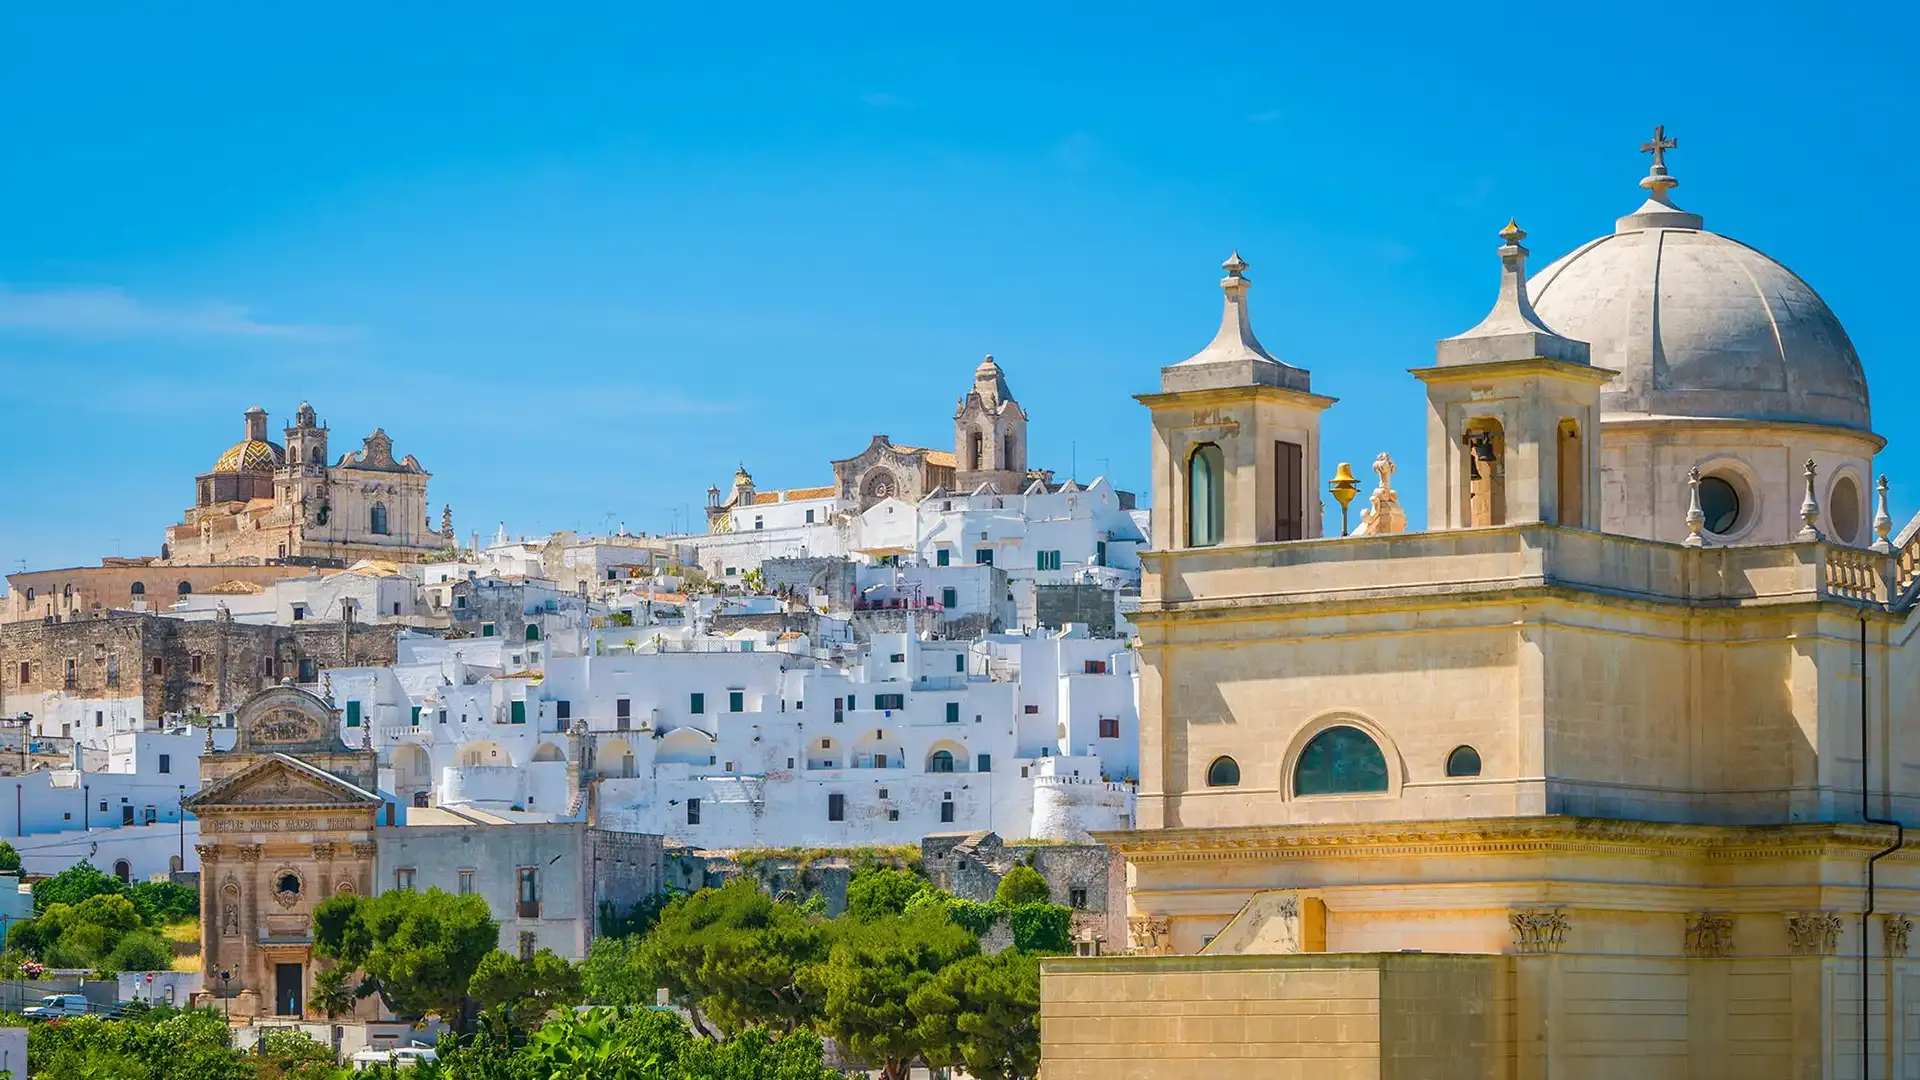 View of Ostuni, the White City, with its churches and white houses.